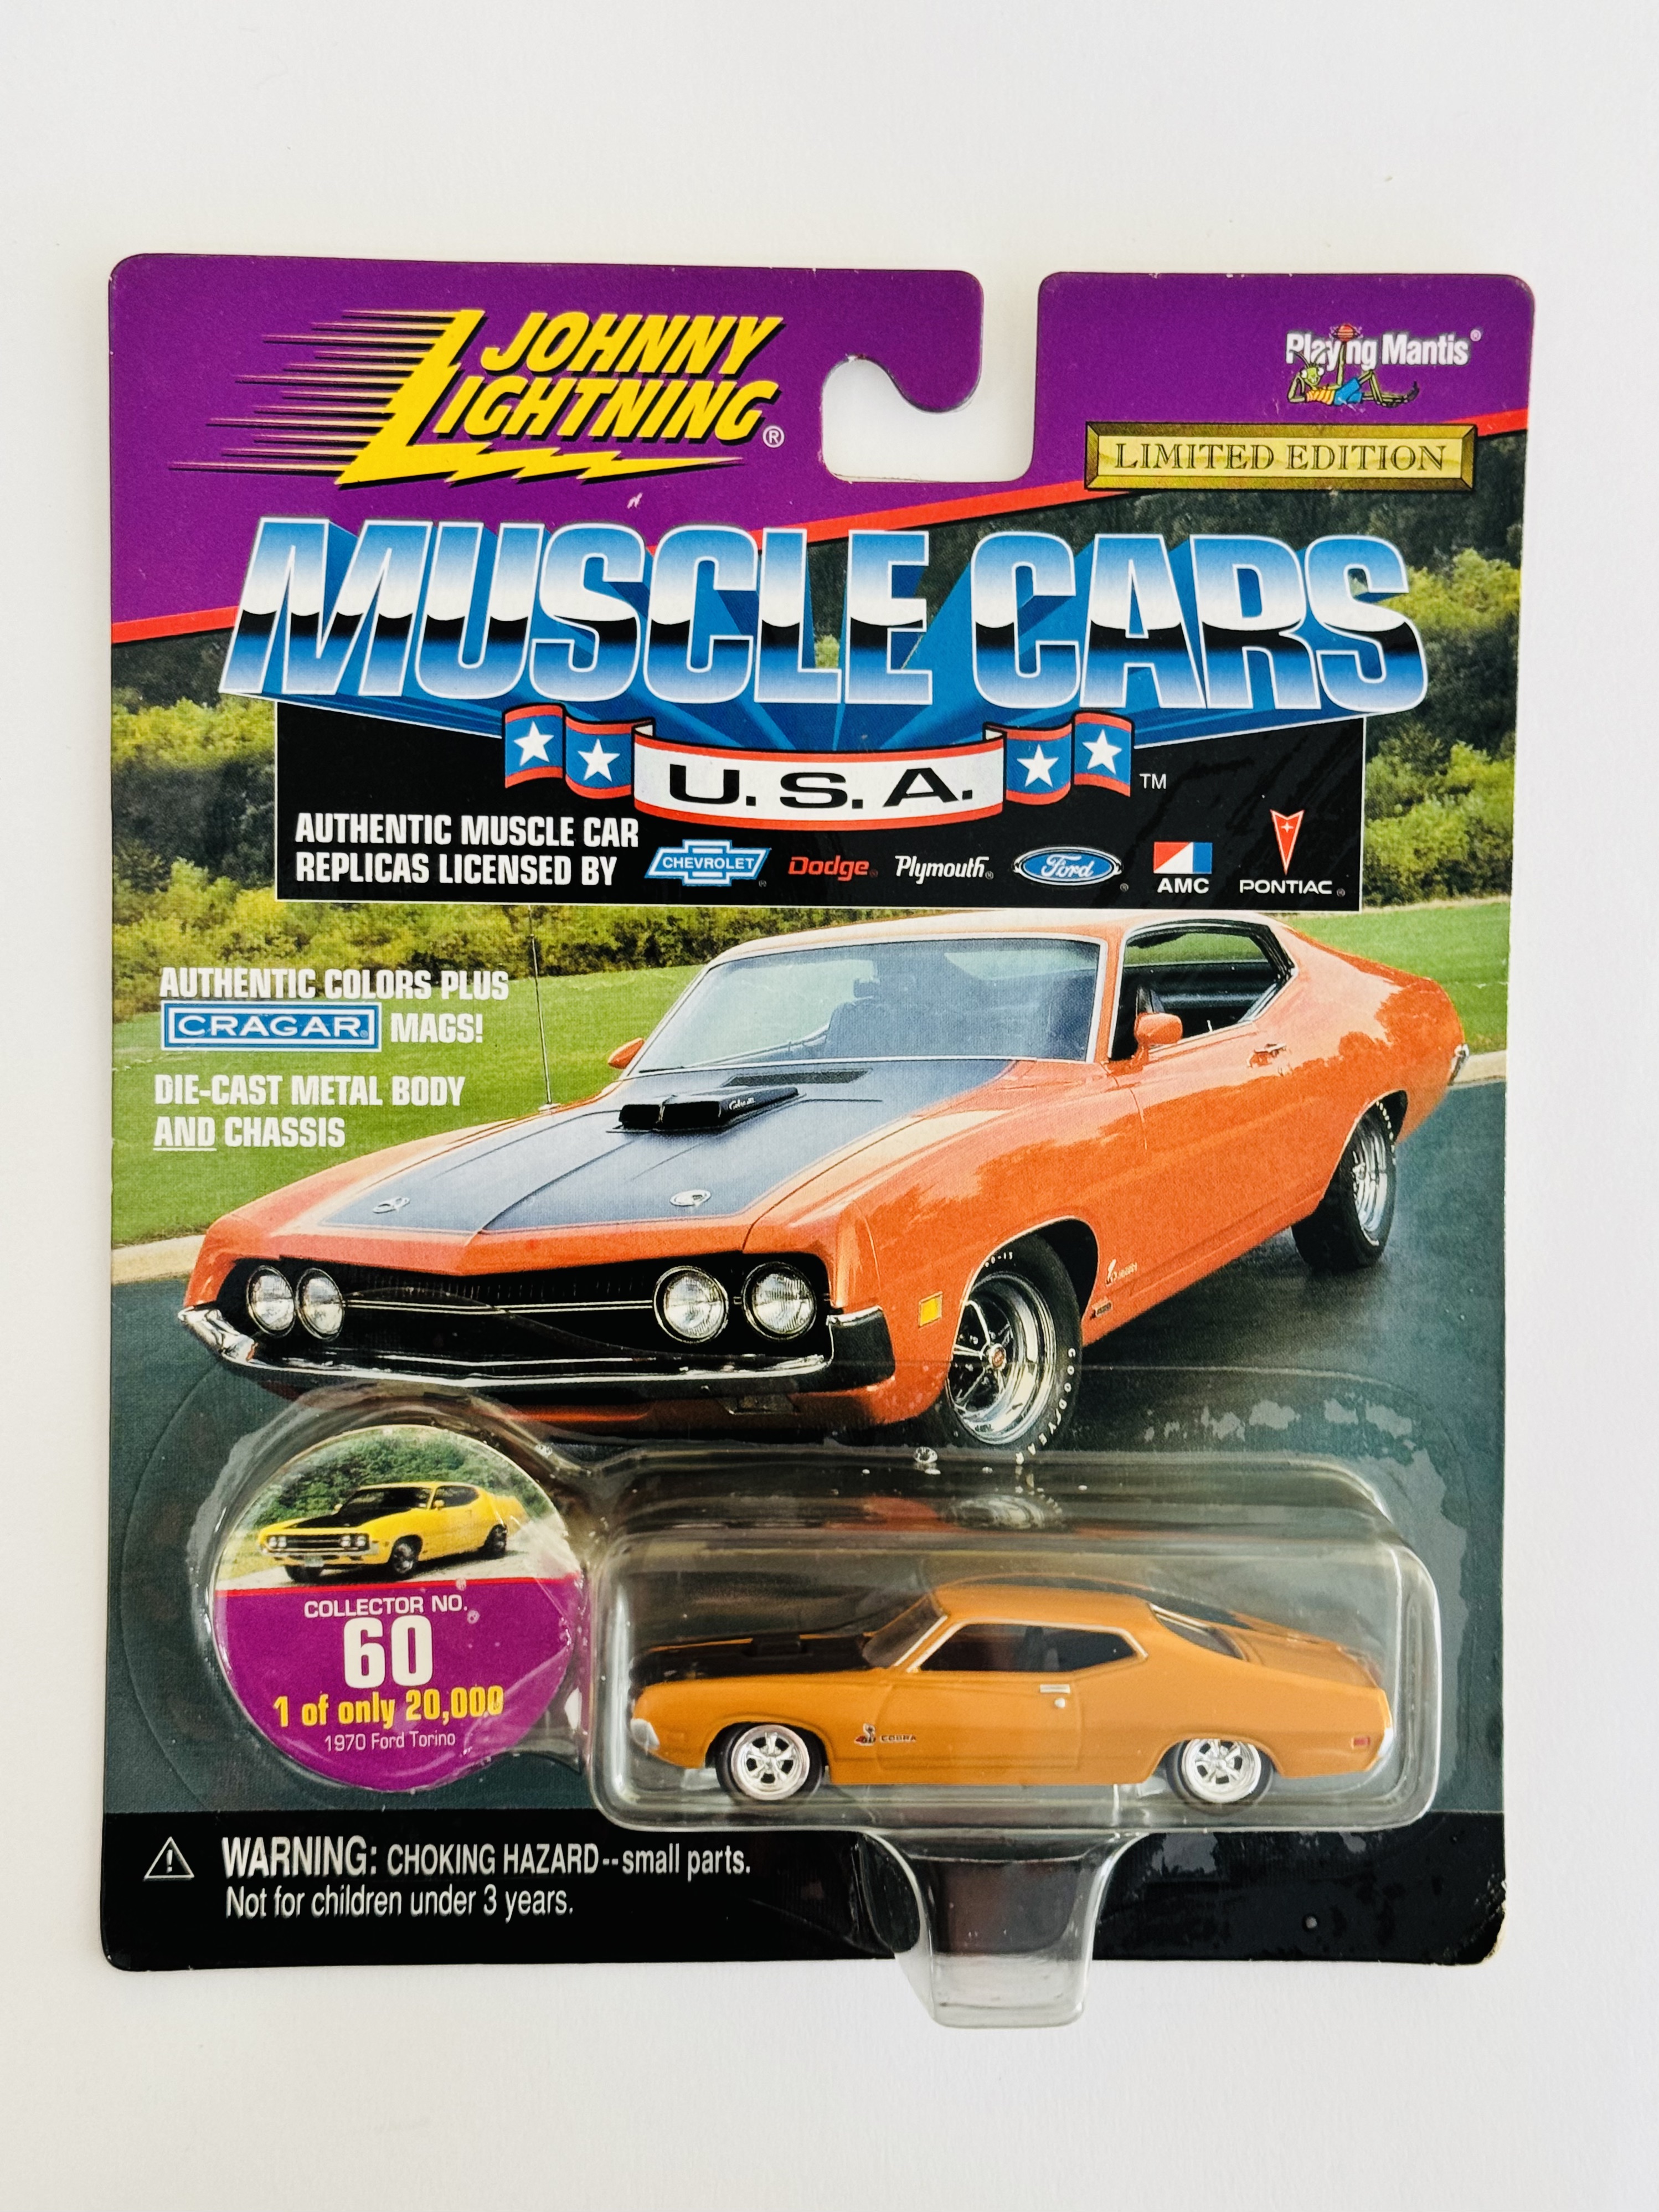 Johnny Lightning Muscle Cars U.S.A. 1970 Ford Torino